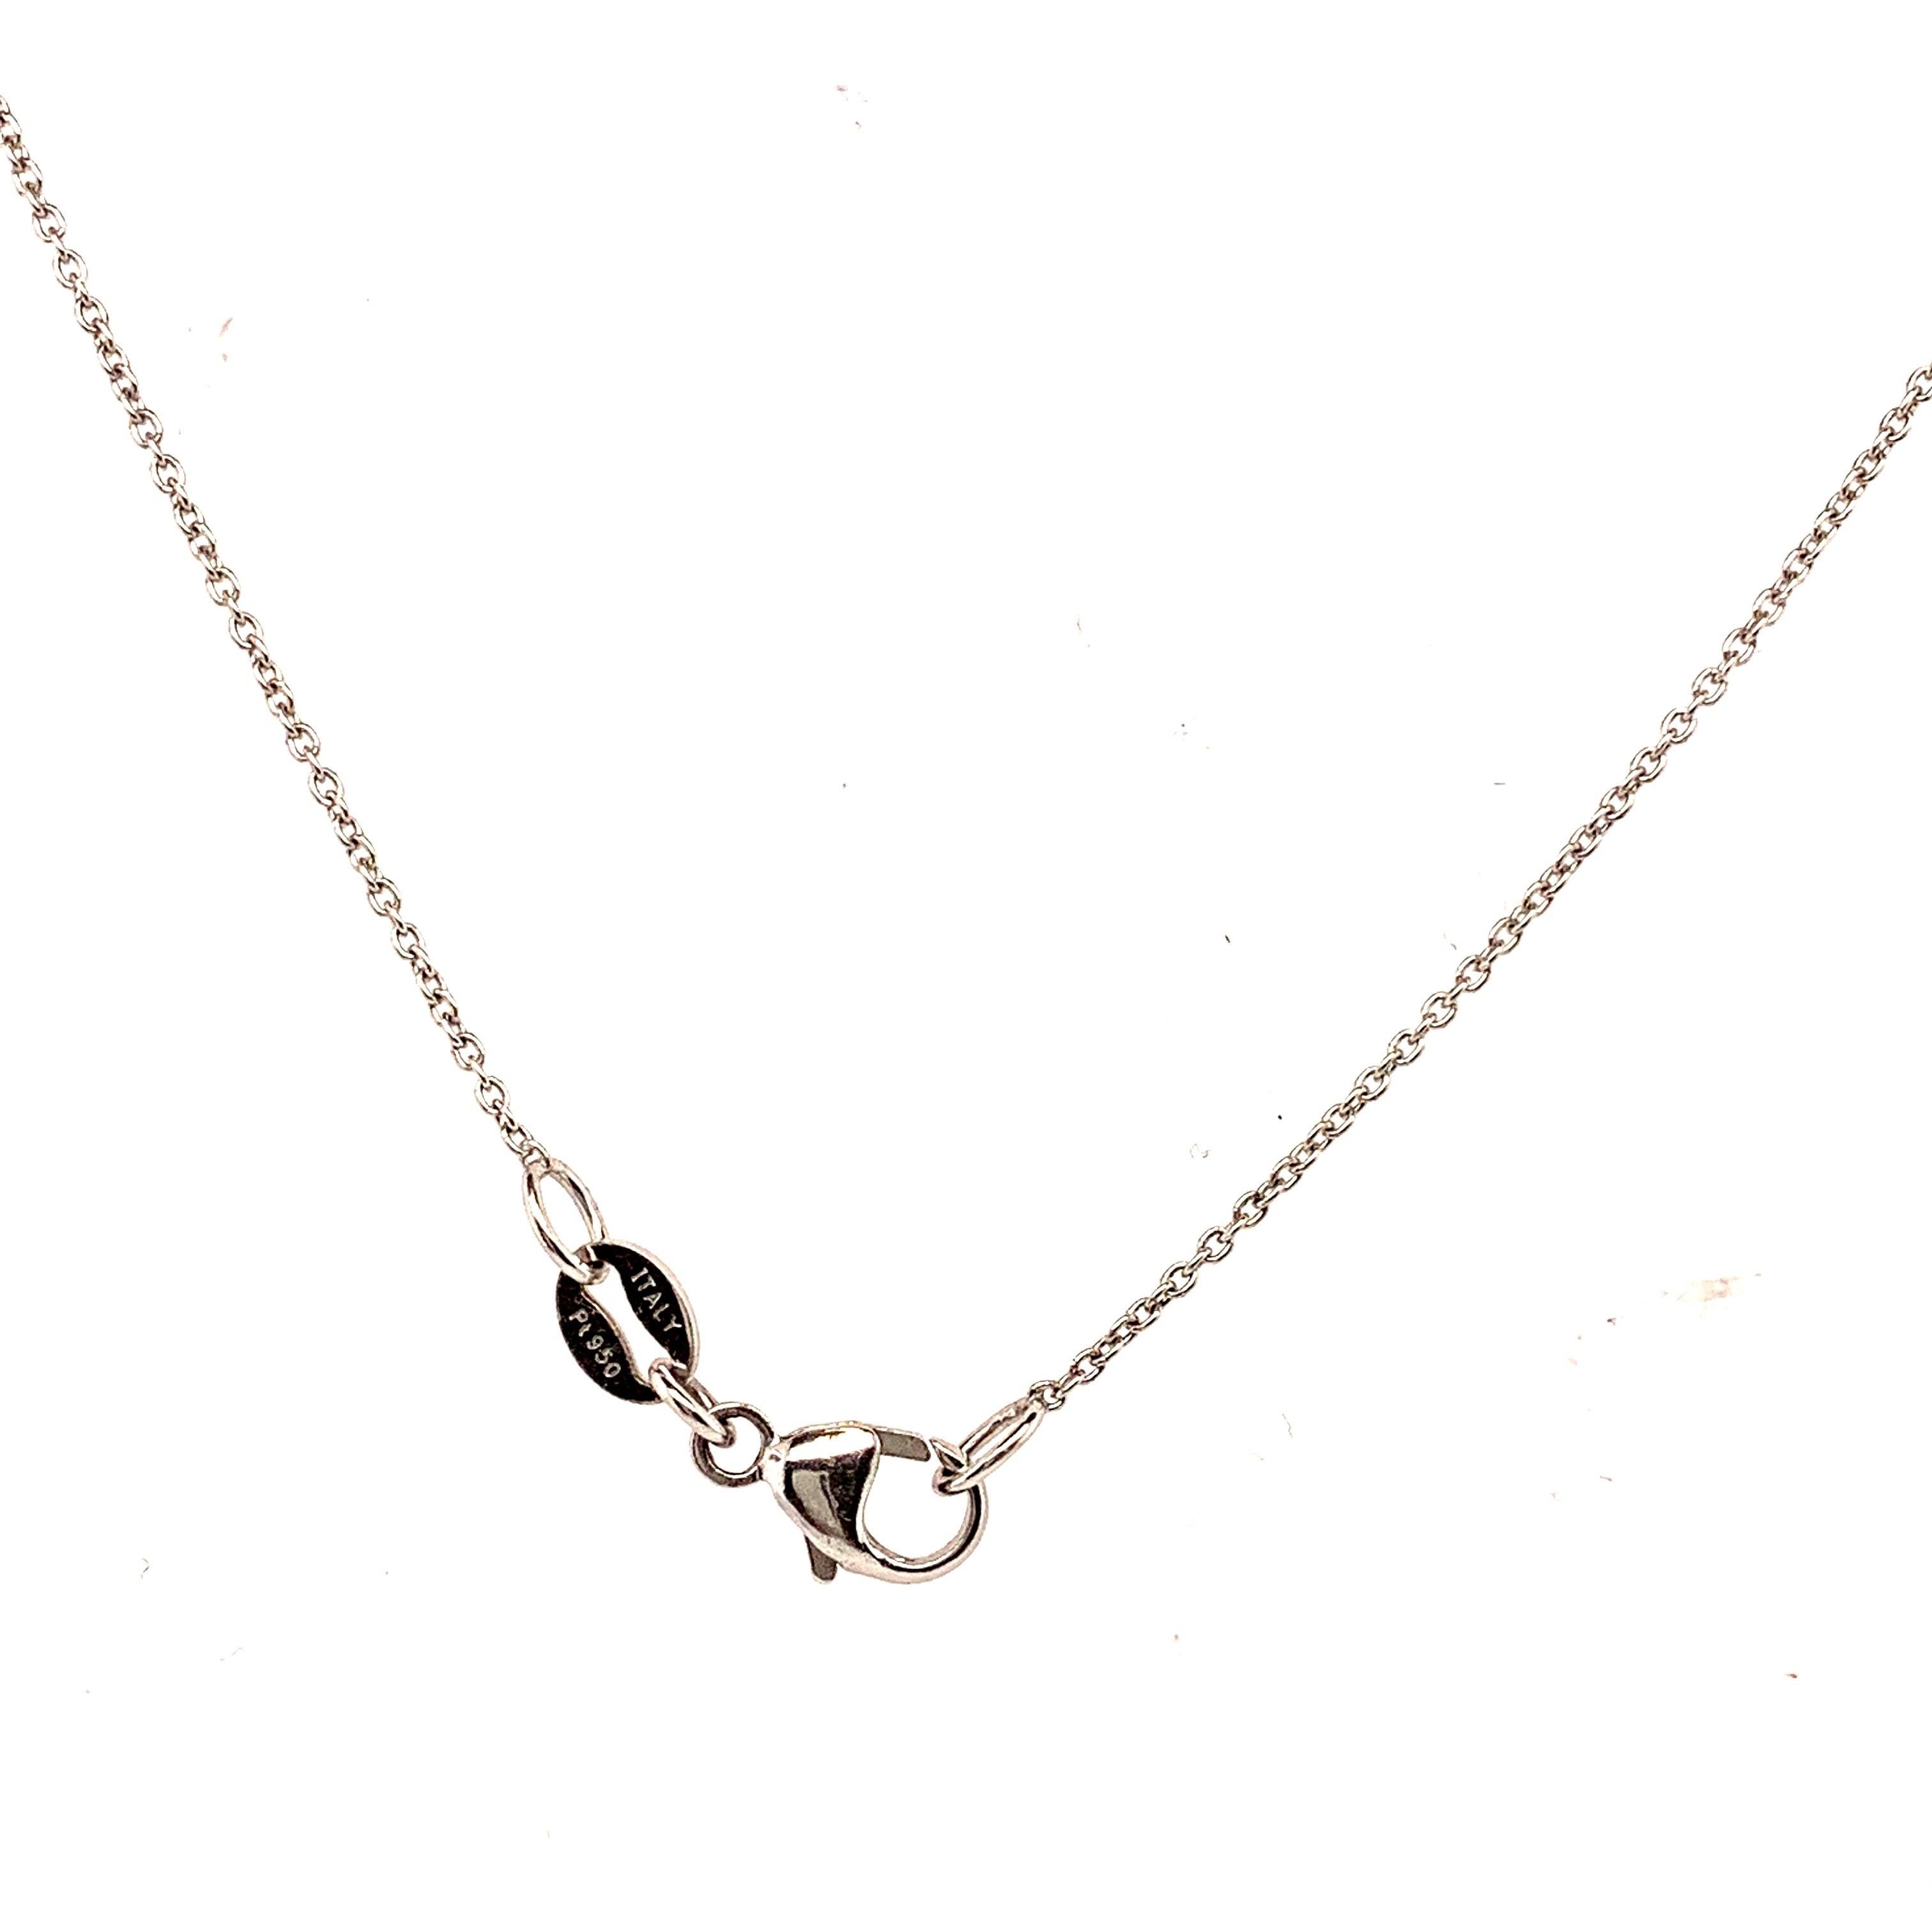 floating pear shaped diamond necklace